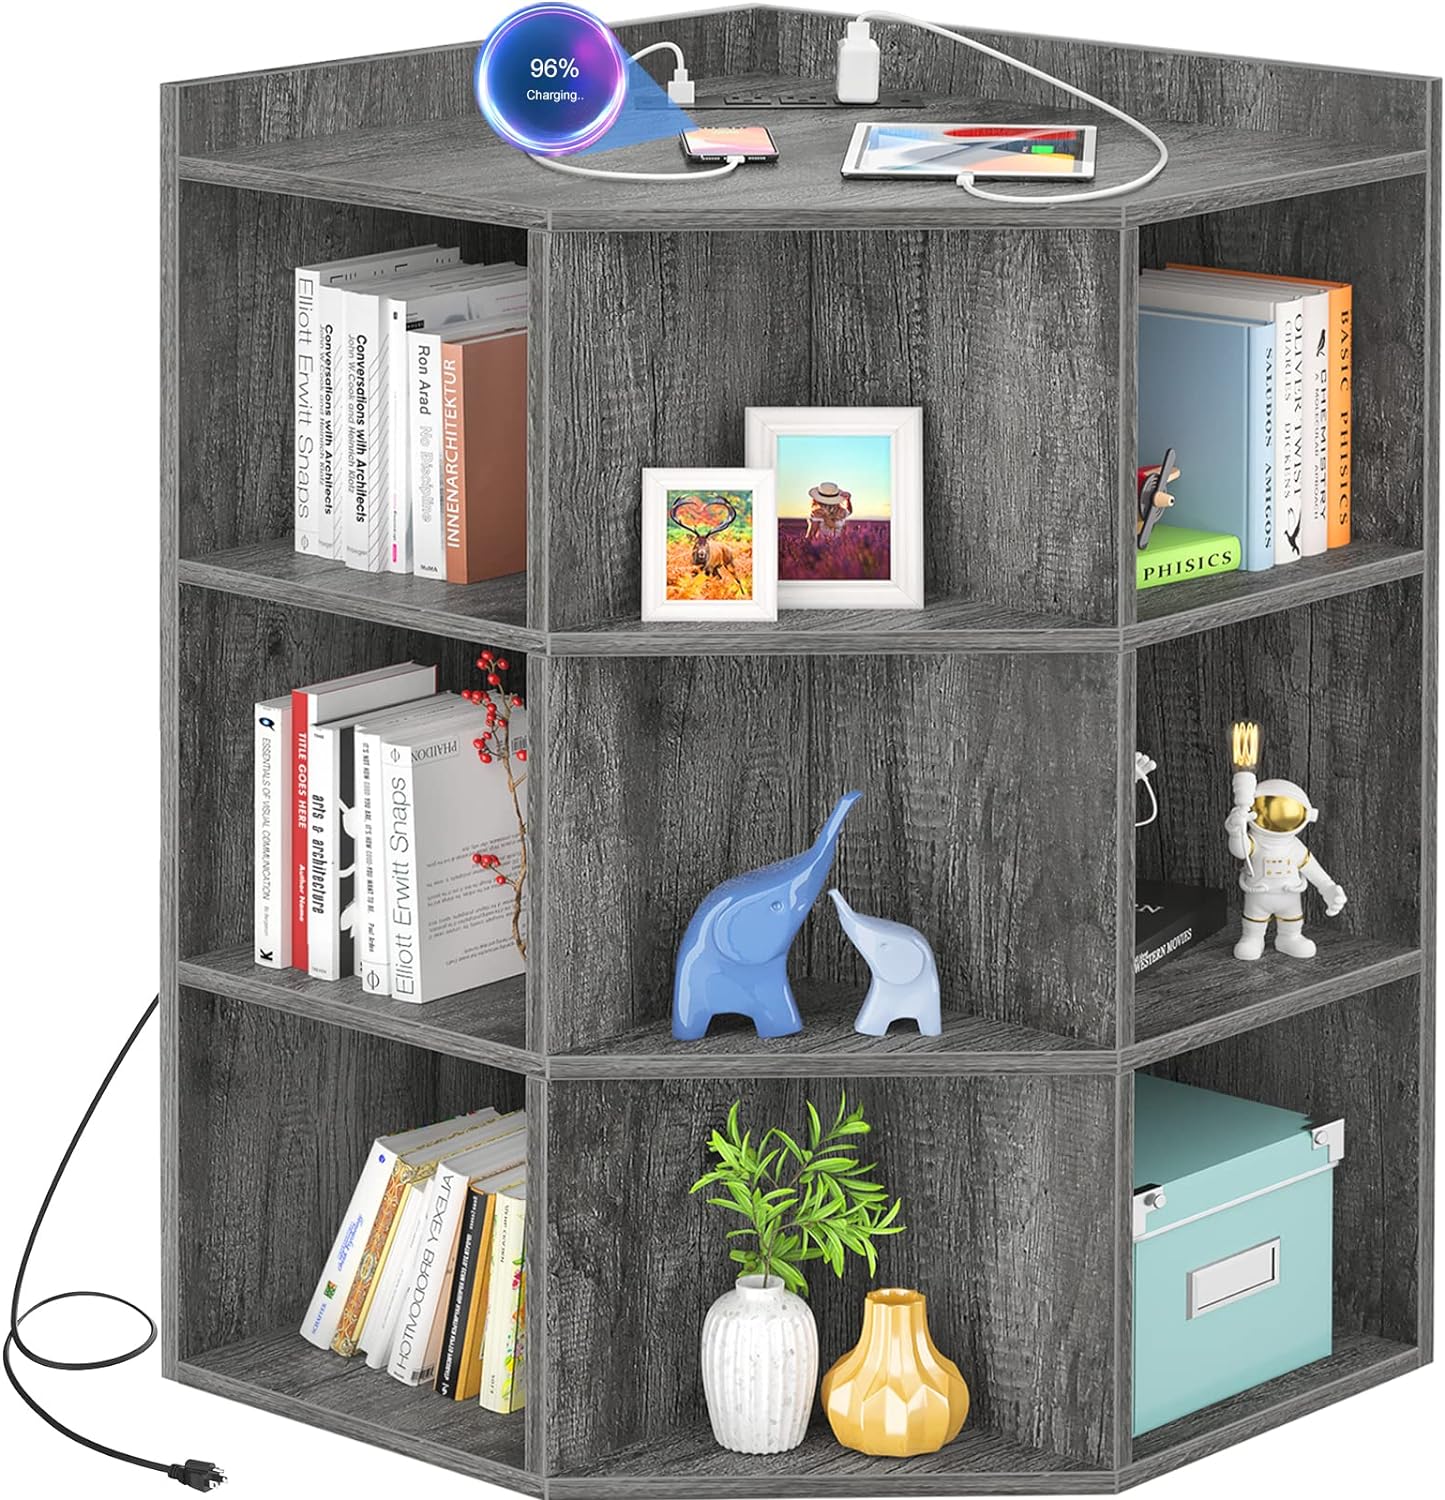 Aheaplus Corner Cabinet, Corner Storage with USB Ports and Outlets, Corner Cube Toy Storage for Small Space, Wooden Corner Cubby Bookshelf with 9 Cubes for Playroom, Bedroom, Living Room, Grey Oak